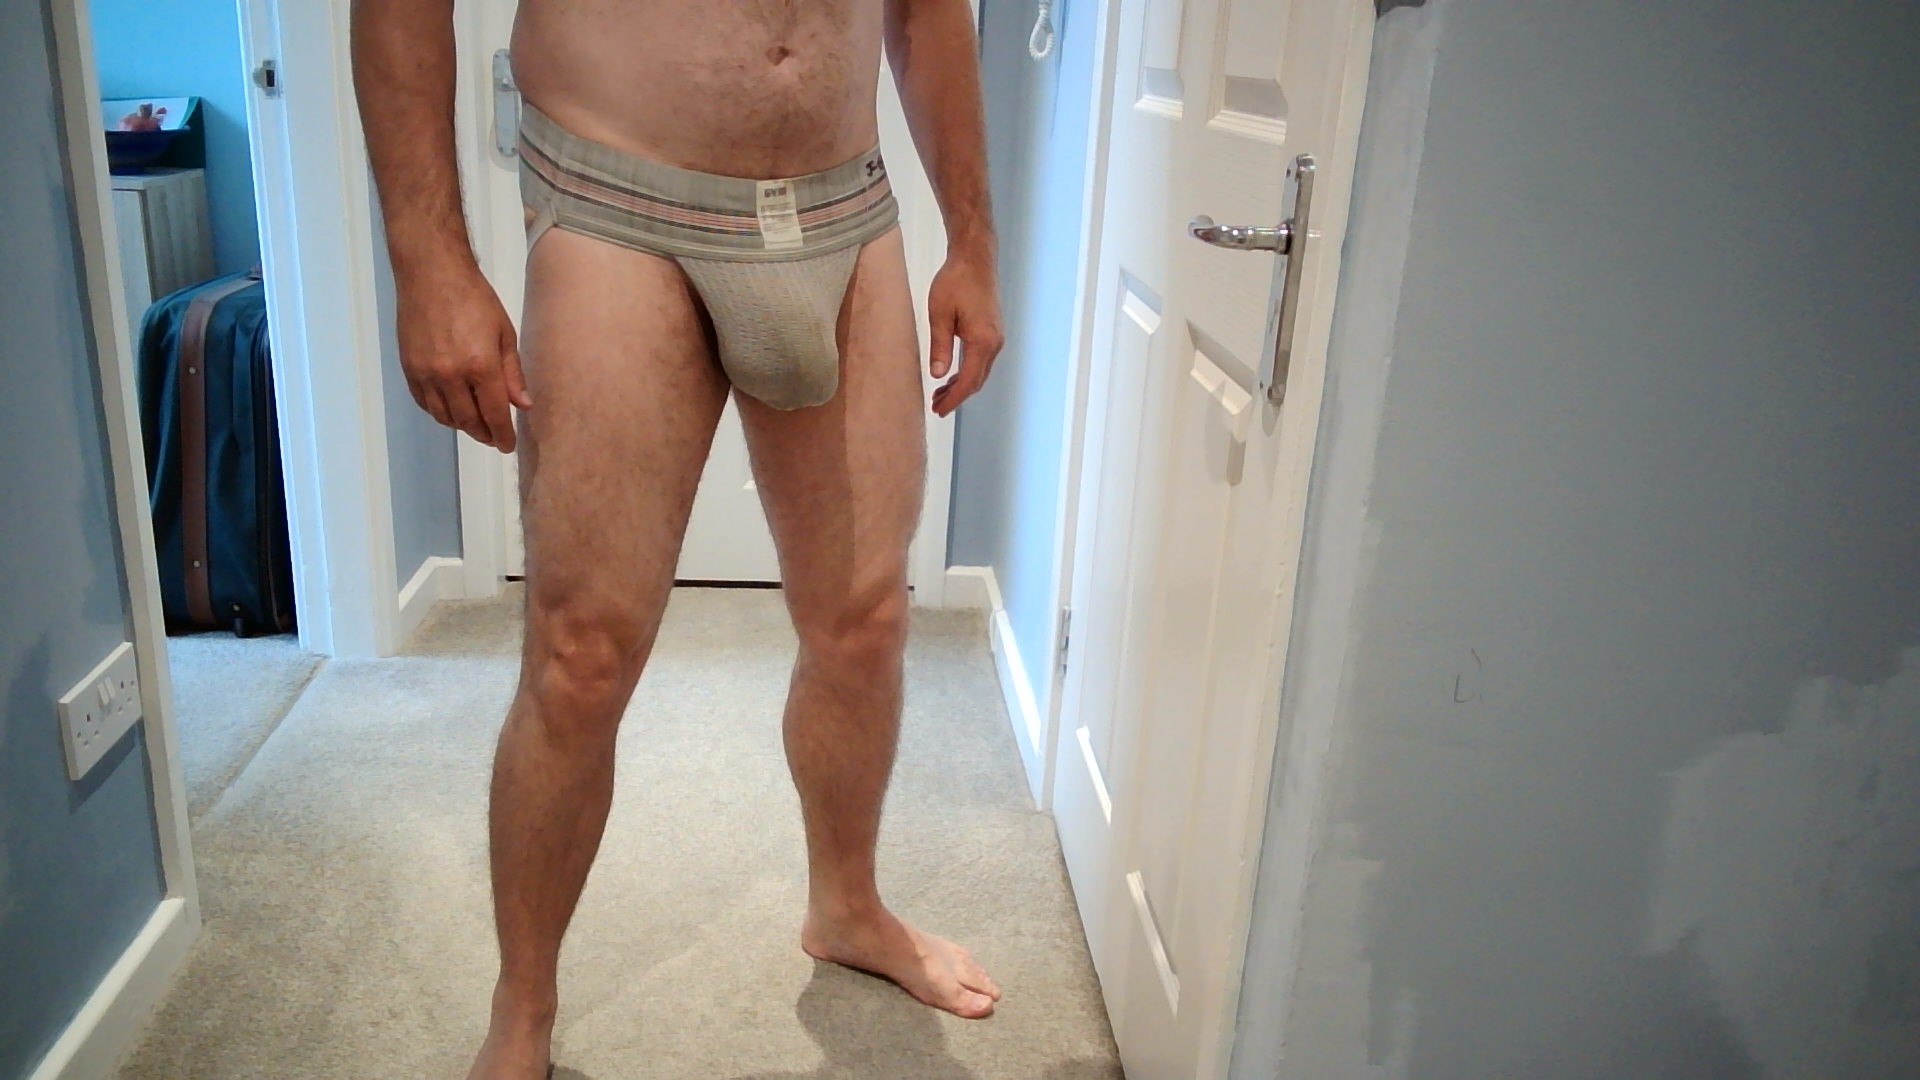 The front view of the filthy, grey GYM #2 jockstrap